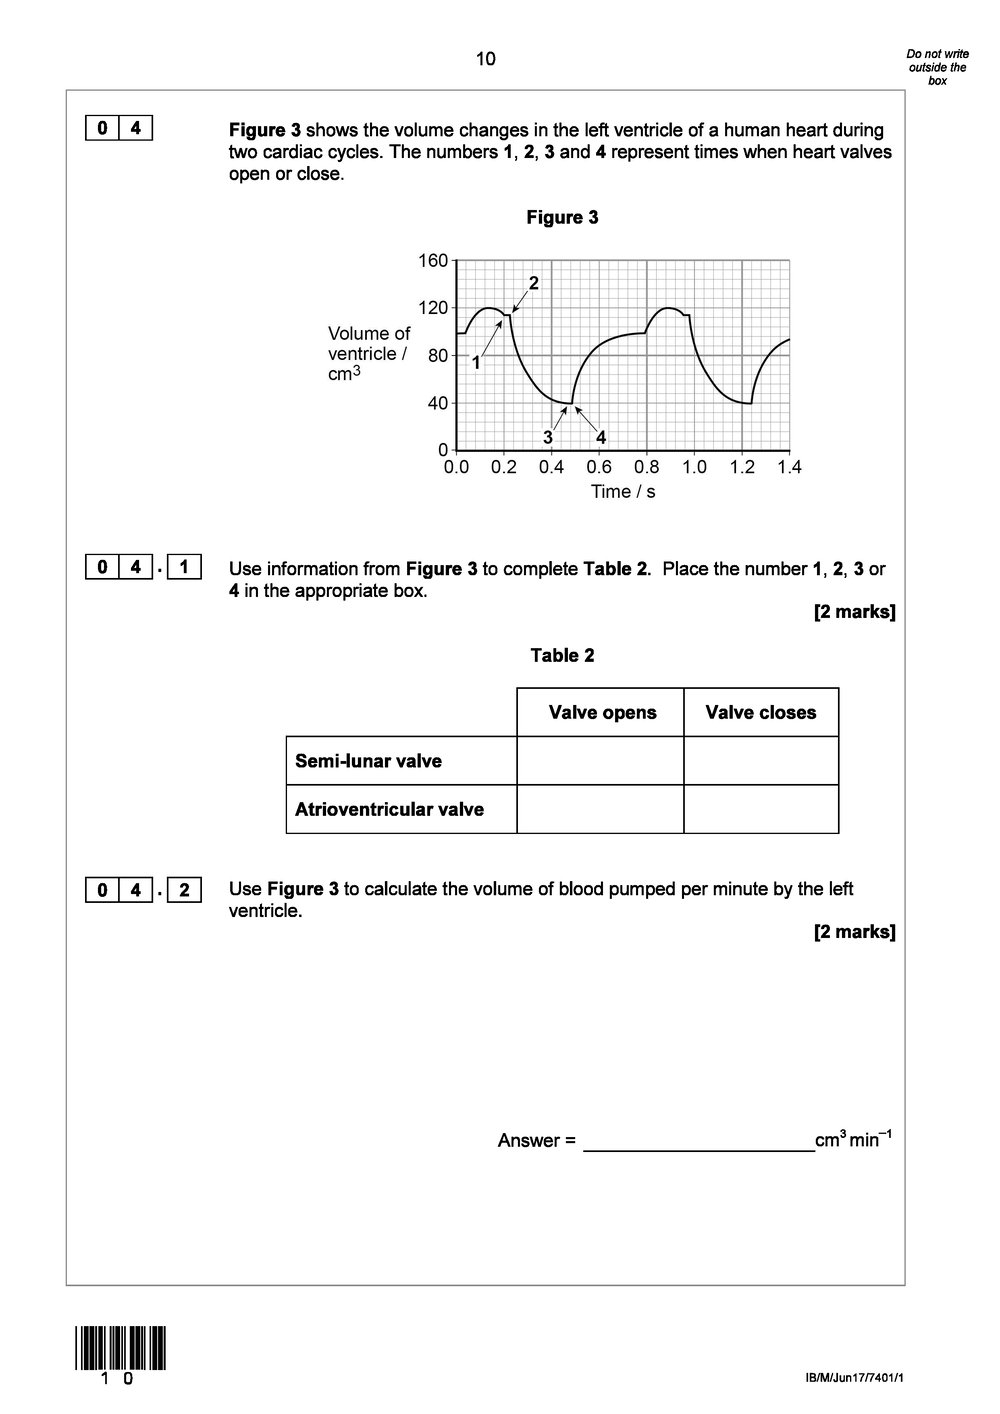 calculationquestionsAQA_Page_18.png